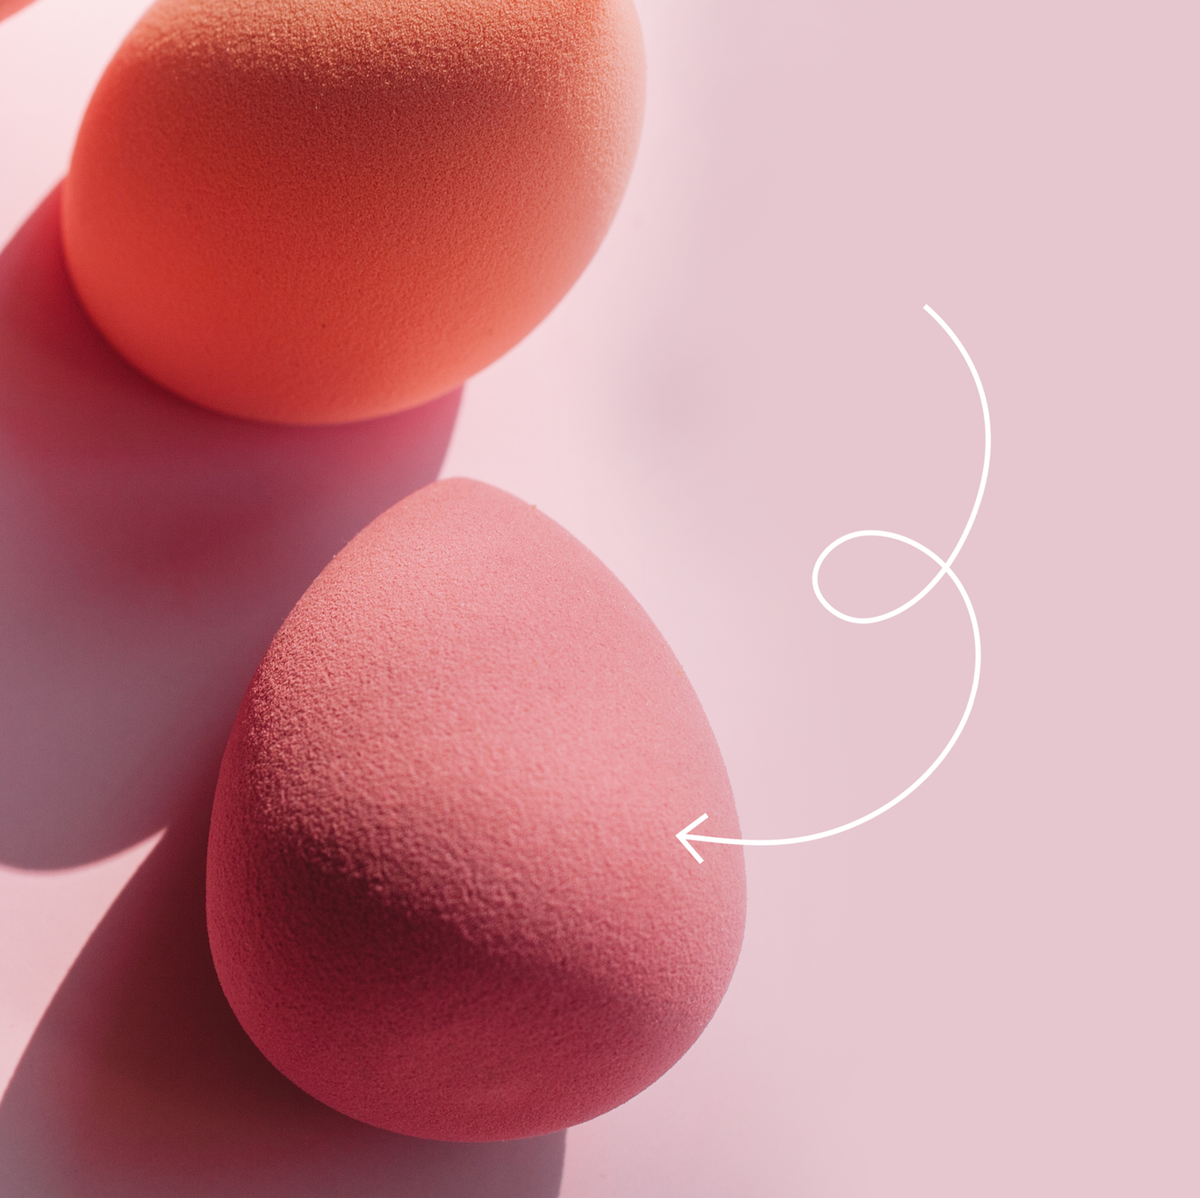 Wash Up! How to Clean Makeup Sponges